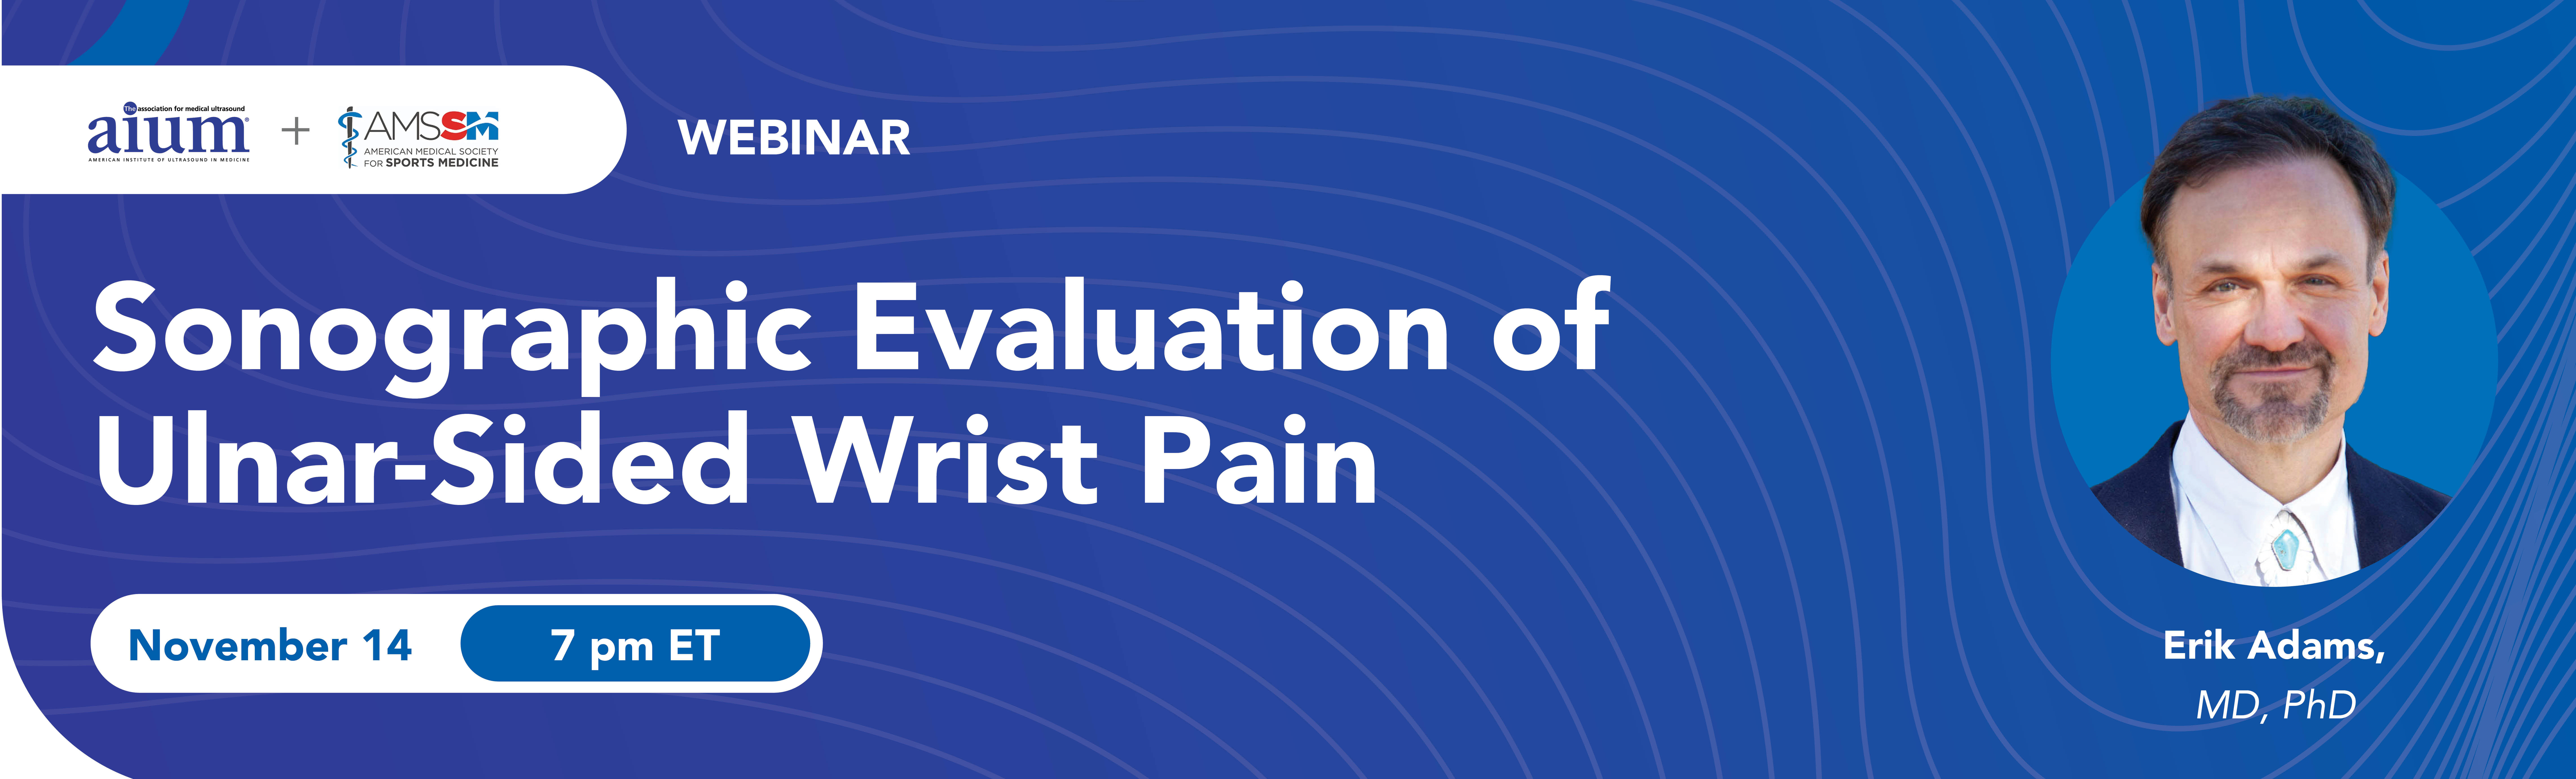 Sonographic Evaluation of Ulnar-Sided Wrist Pain